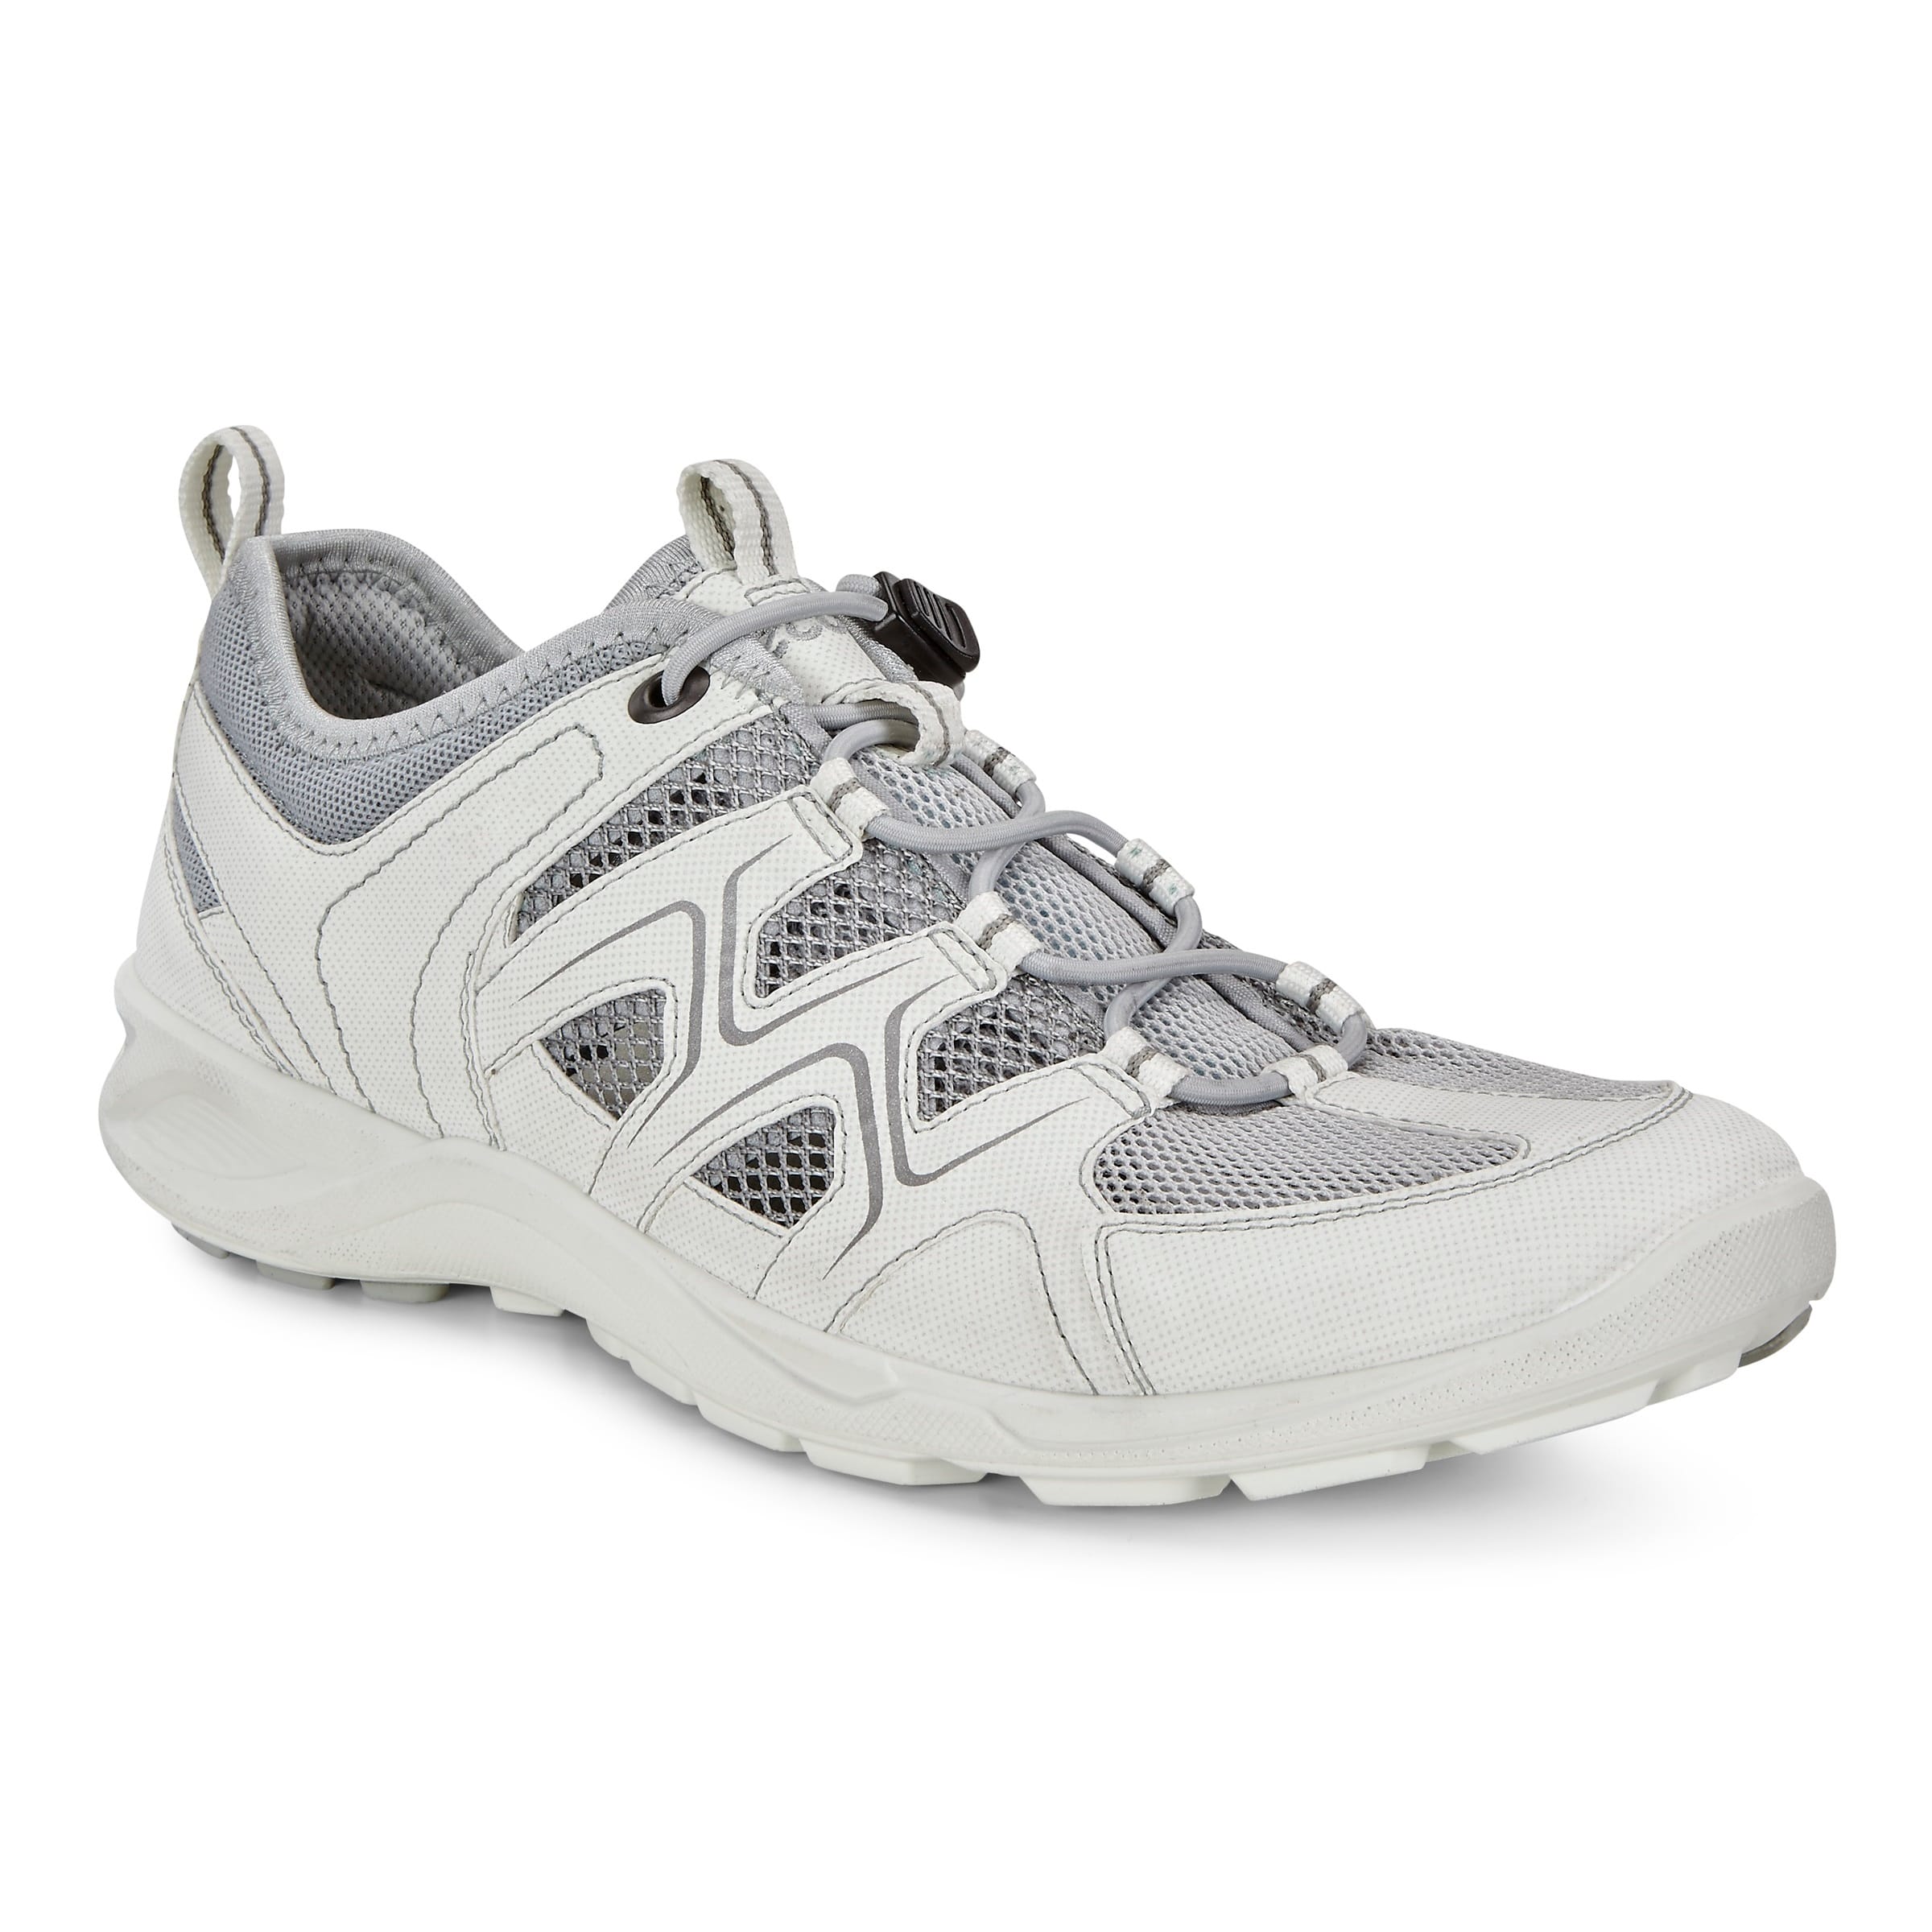 Ecco Women's Terracruise LT from Outnorth